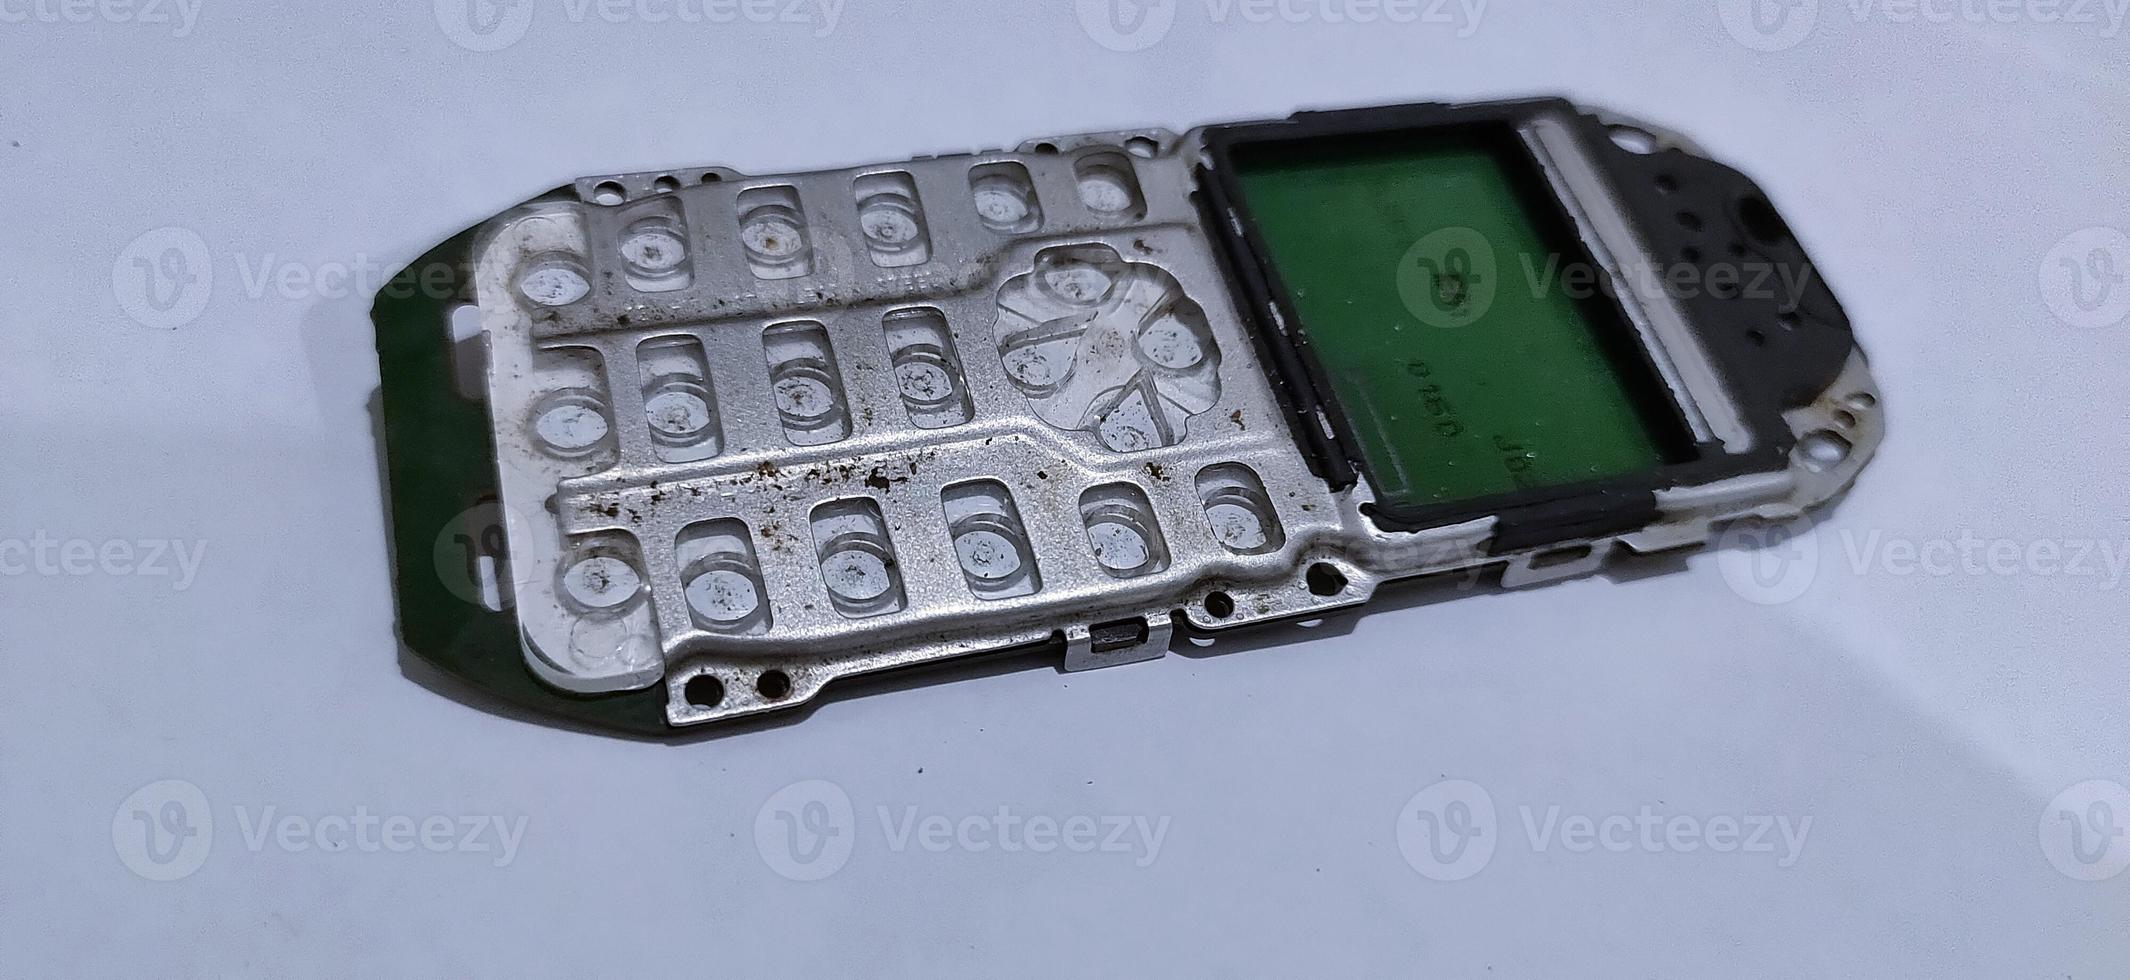 The damaged circuit board cellular is an older model photo